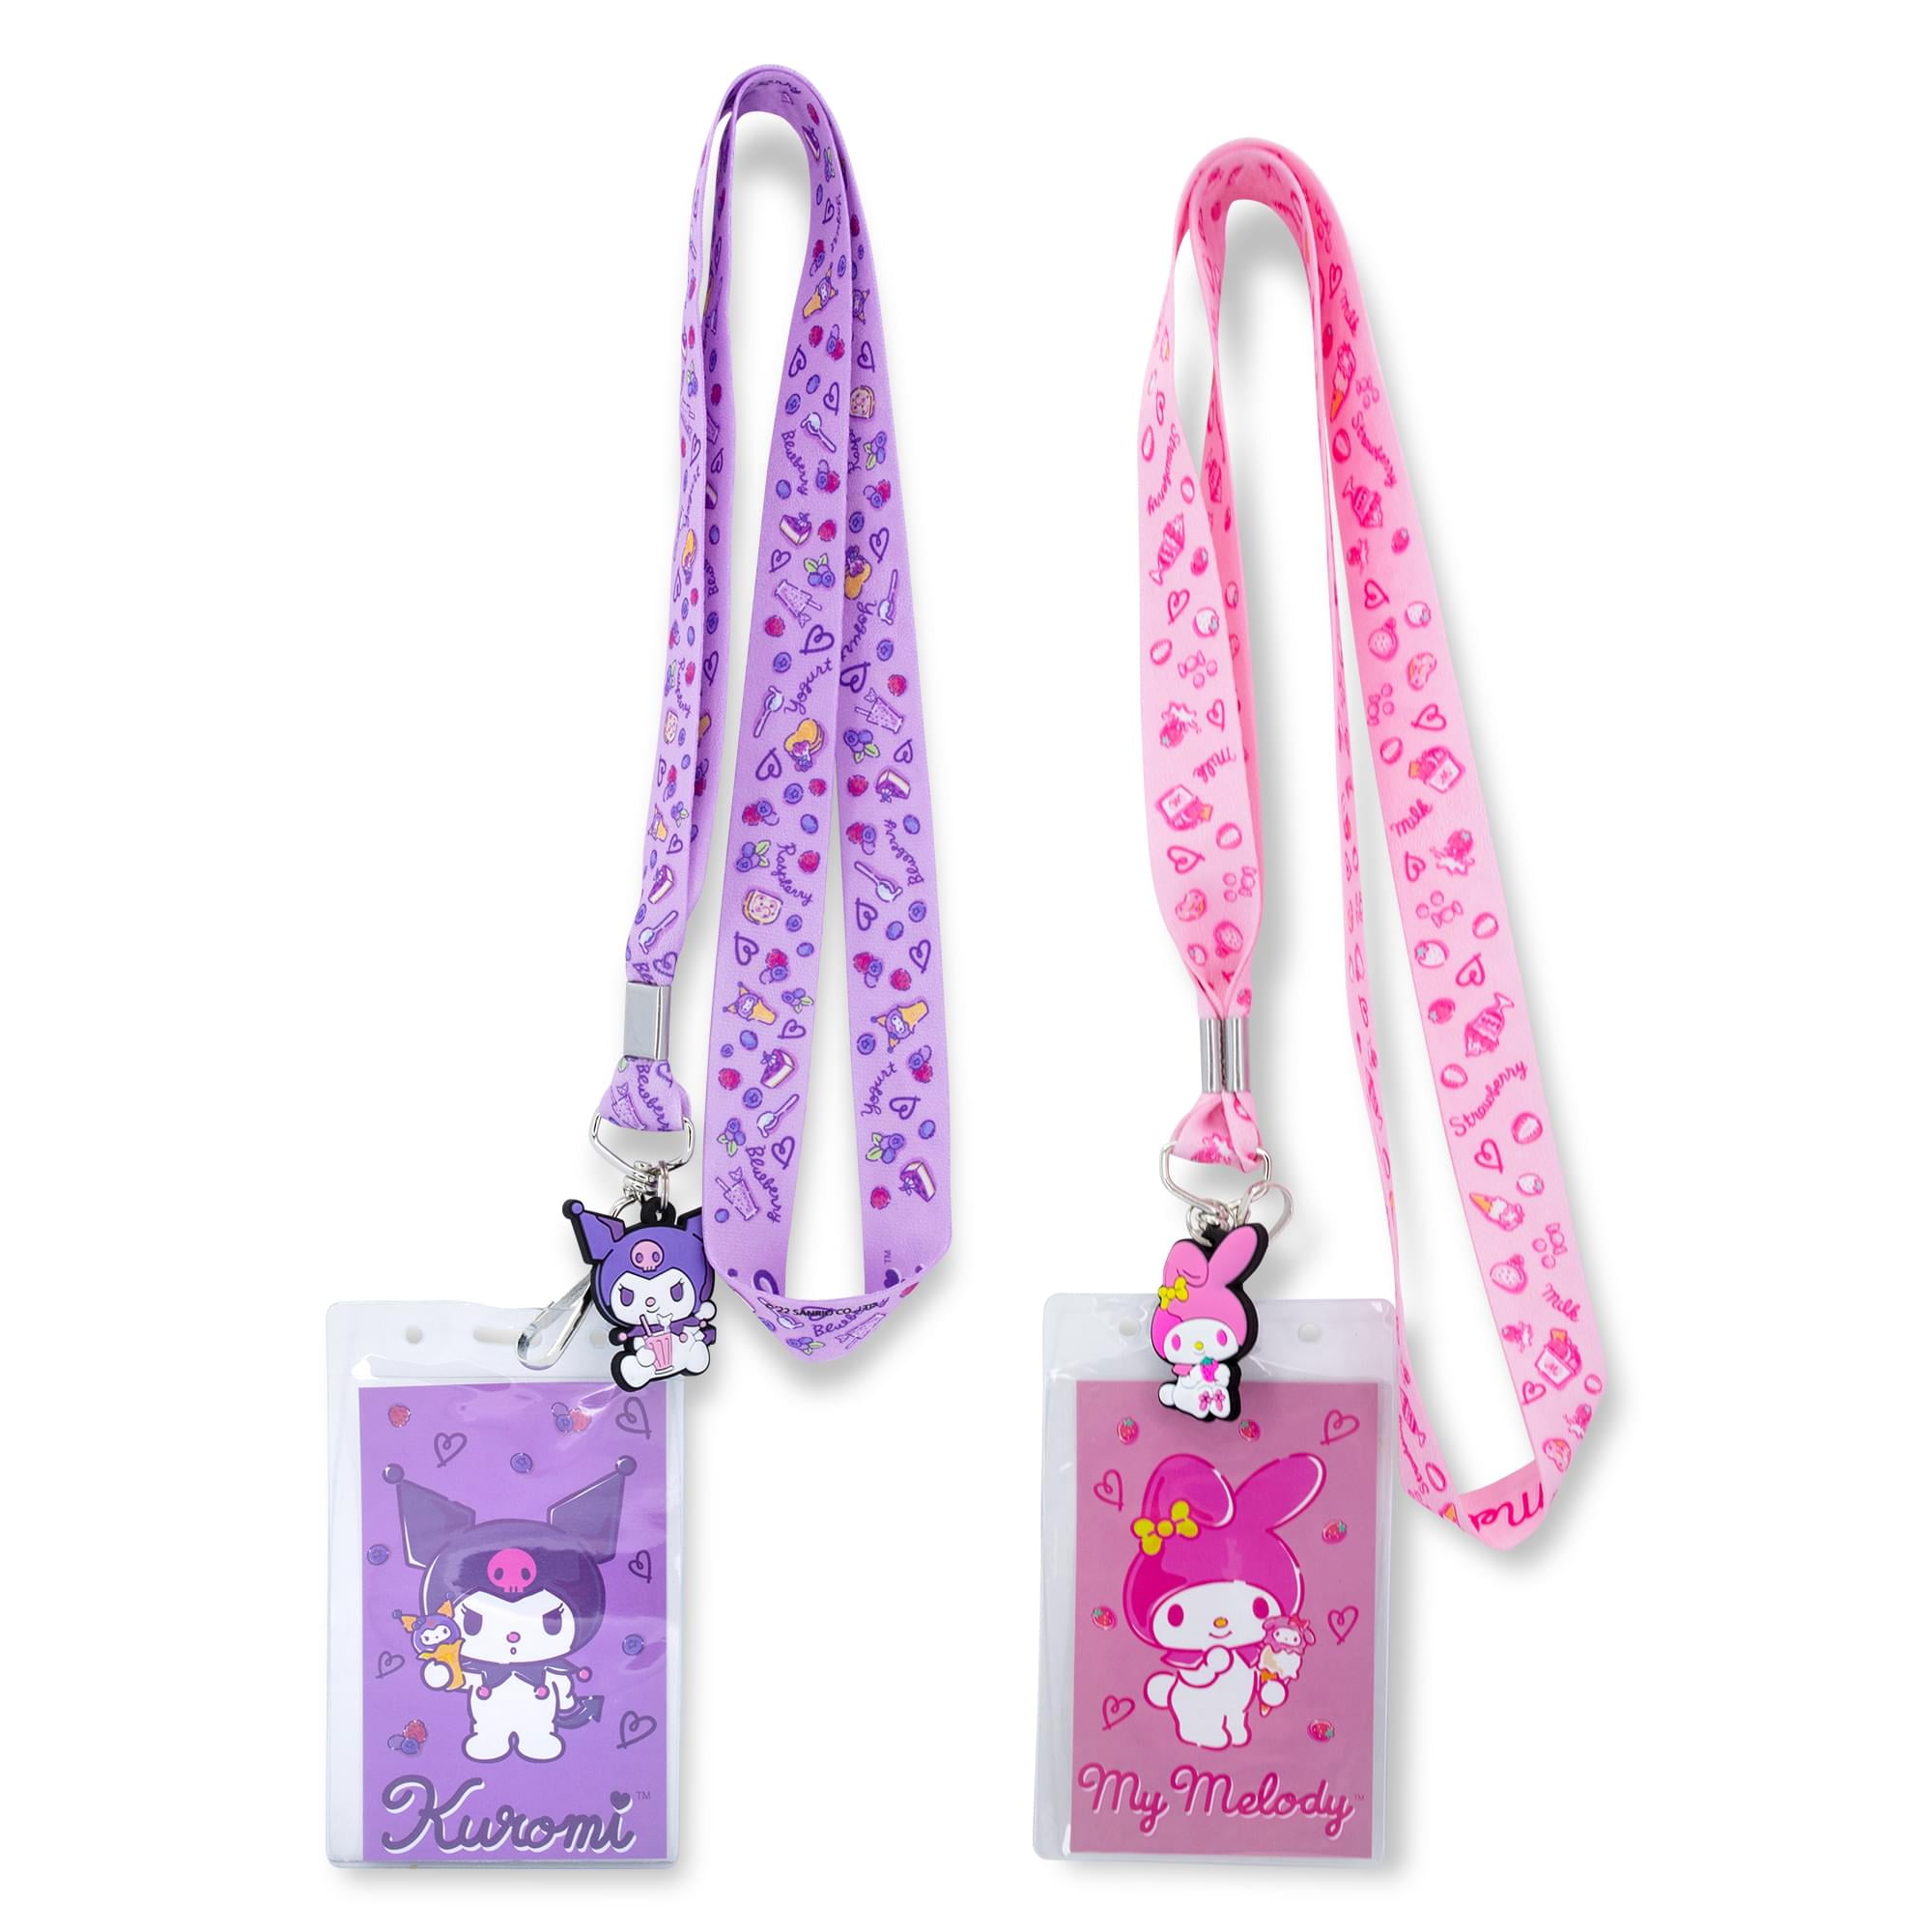 Sanrio My Melody And Kuromi Lanyards With ID Badge Holders and Charms